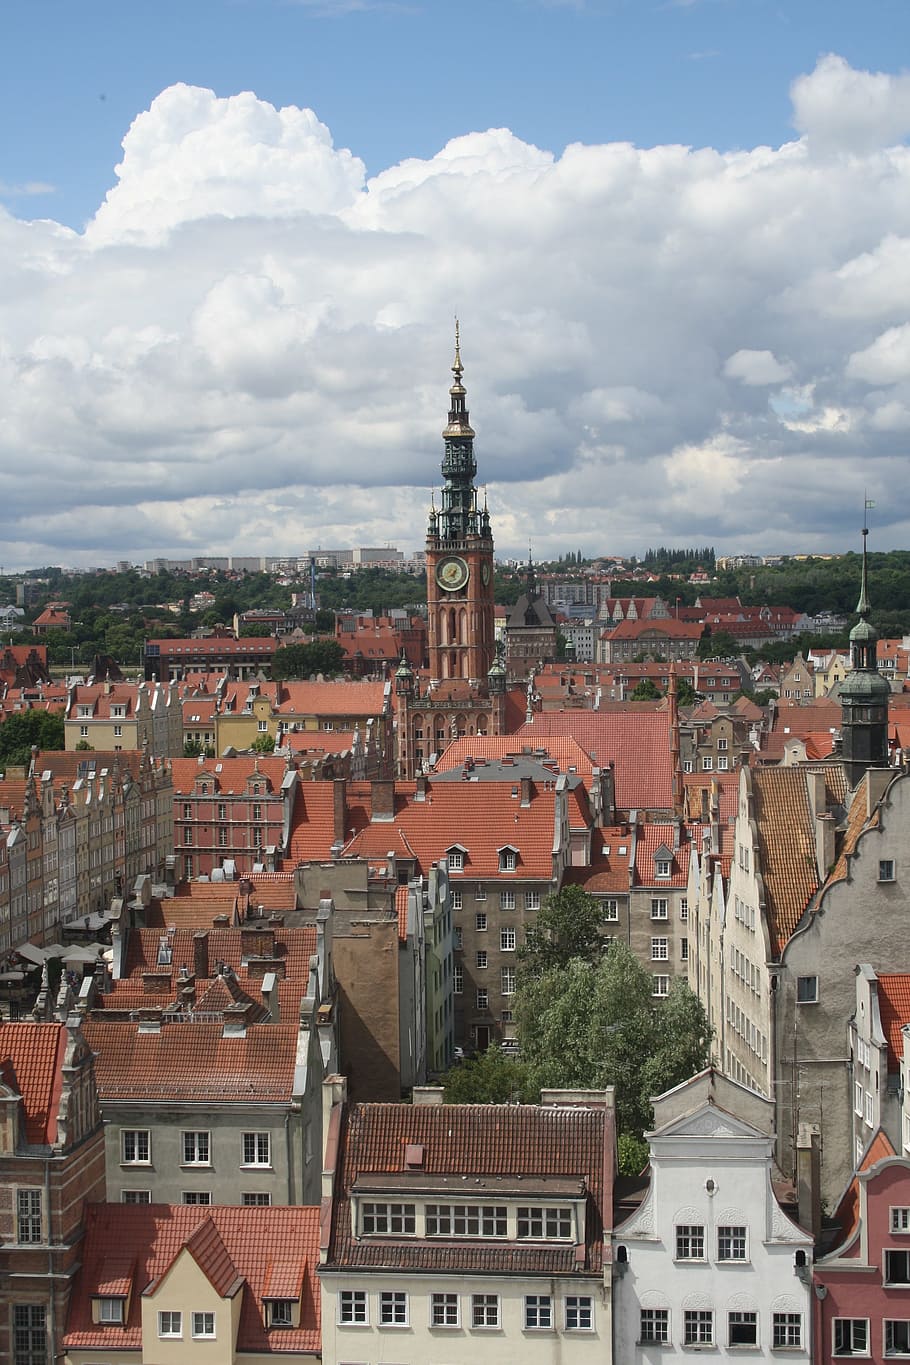 gdansk, poland, sights, center, history, tower, architecture, city ​​center, historical, building